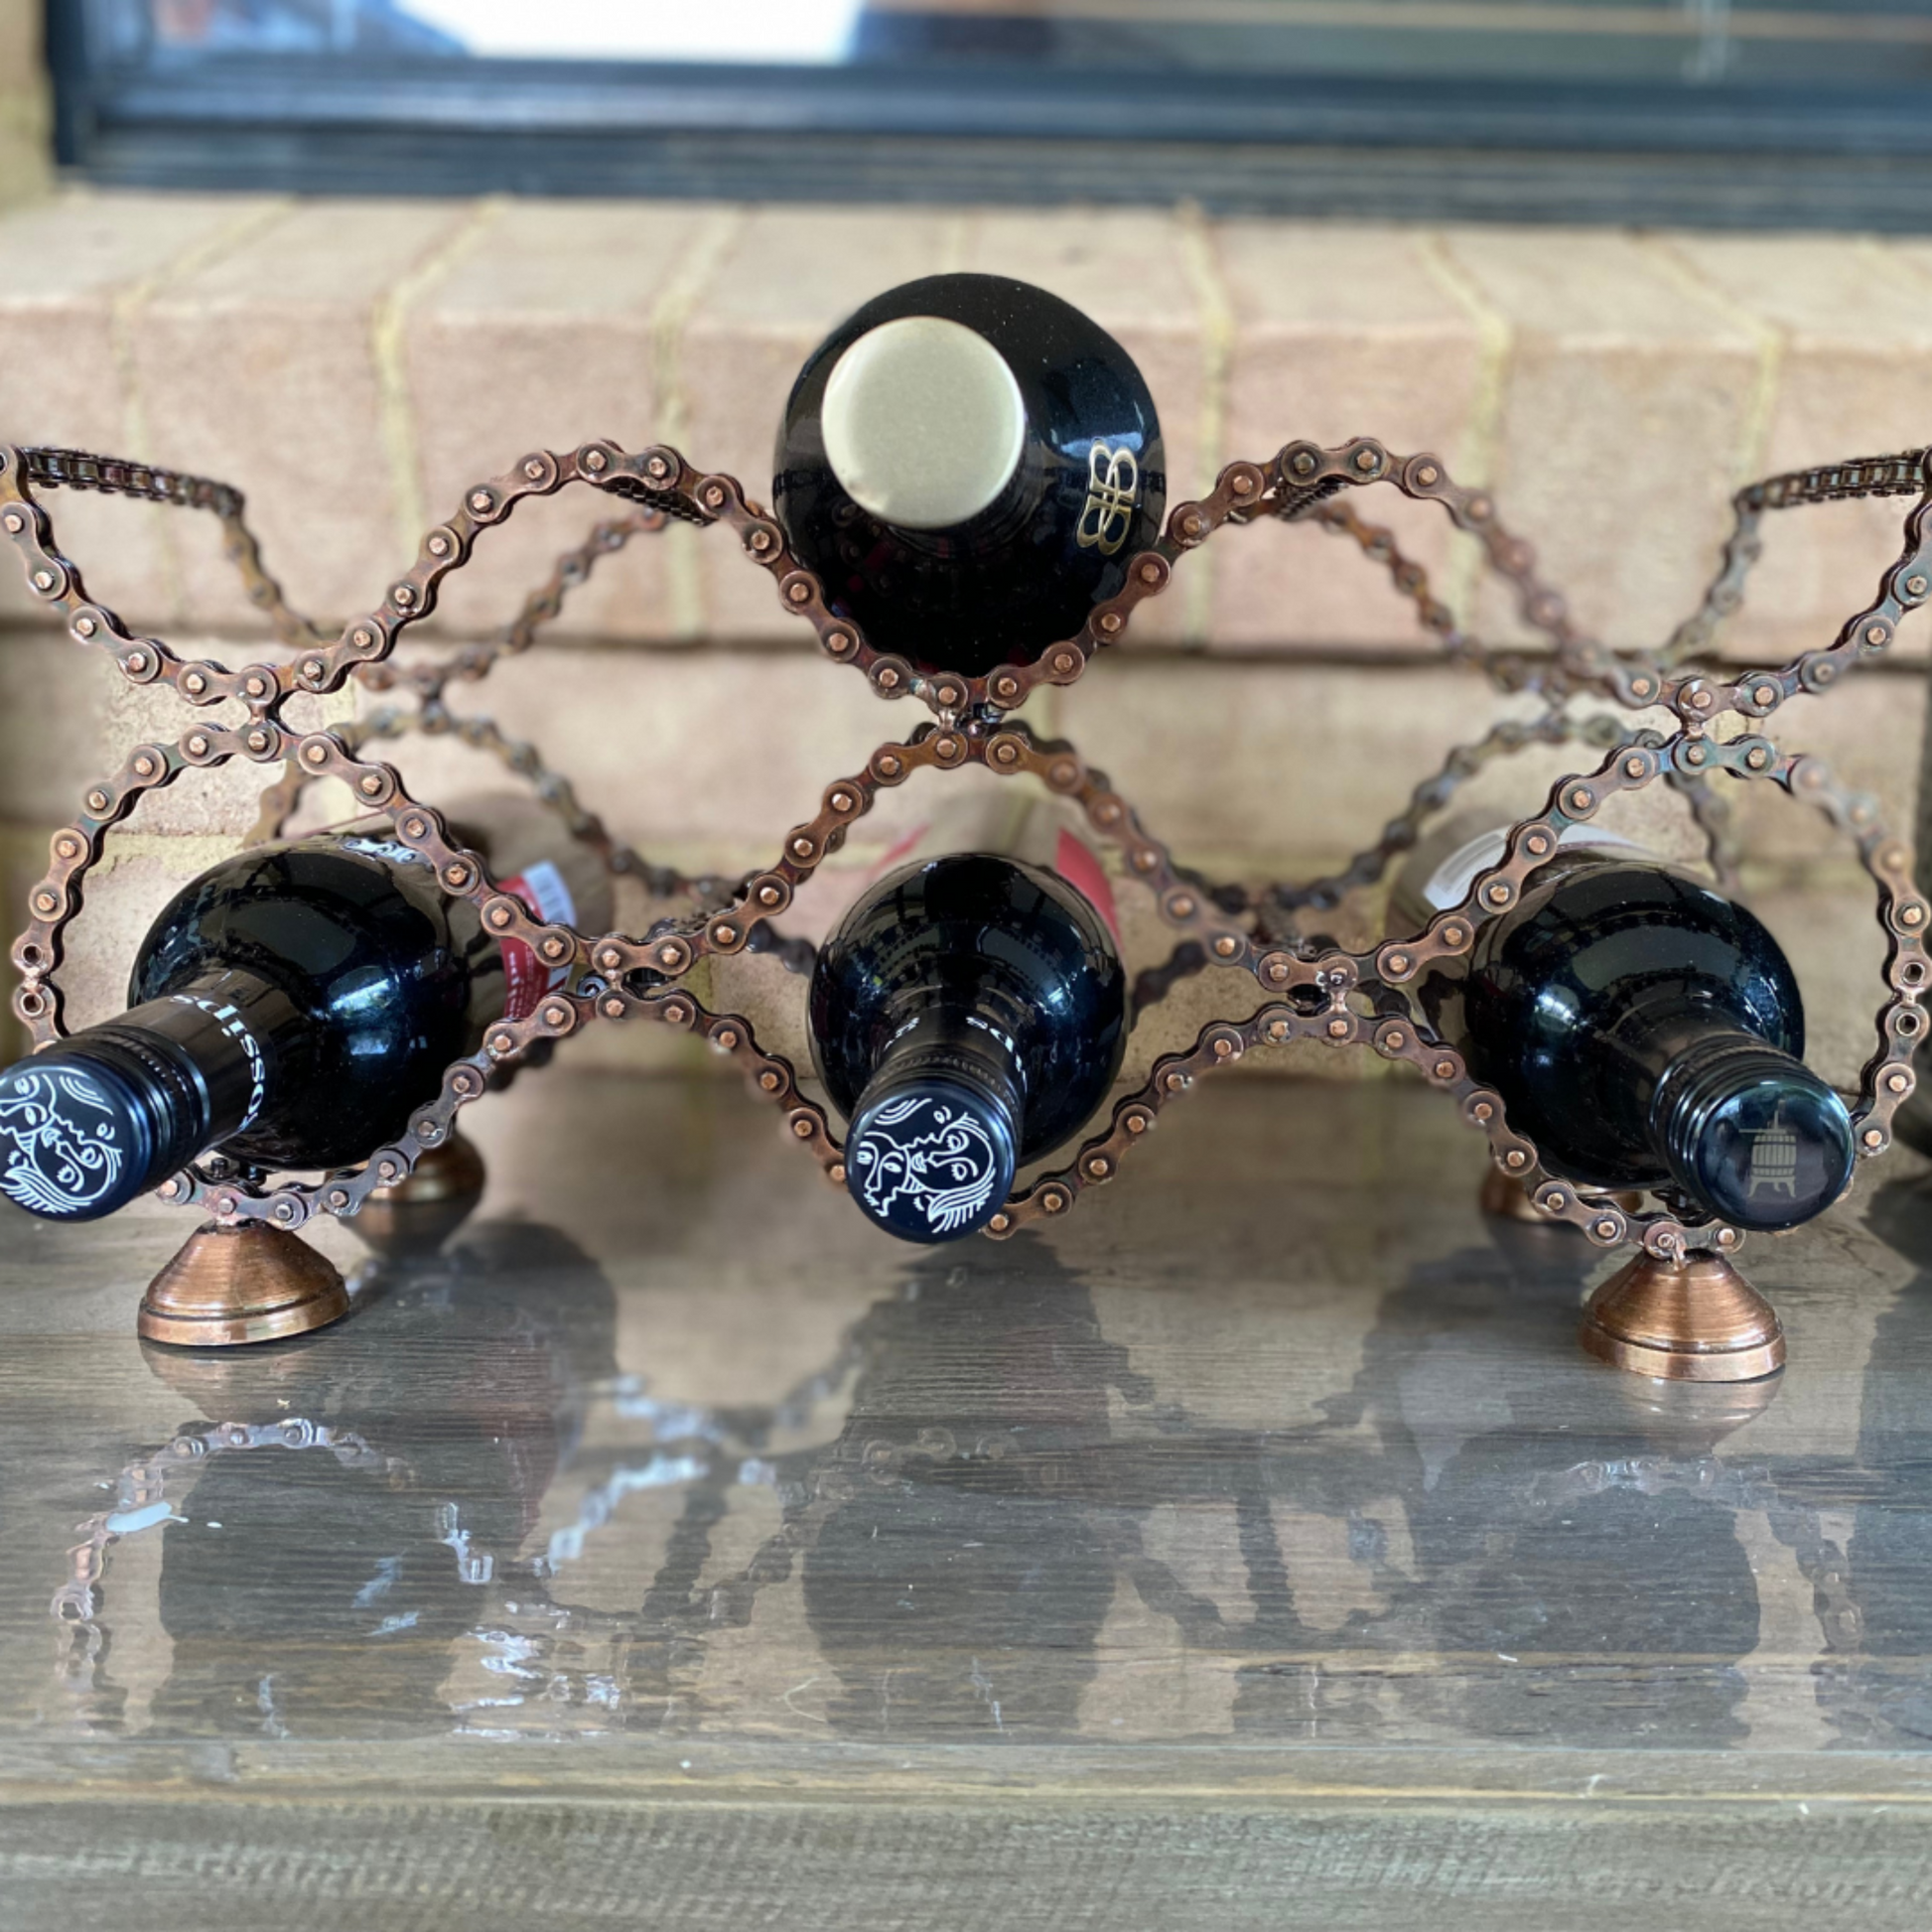 Upcycled Bicycle Chain 8 Wine Bottle Rack Rustic Holder - Aksa